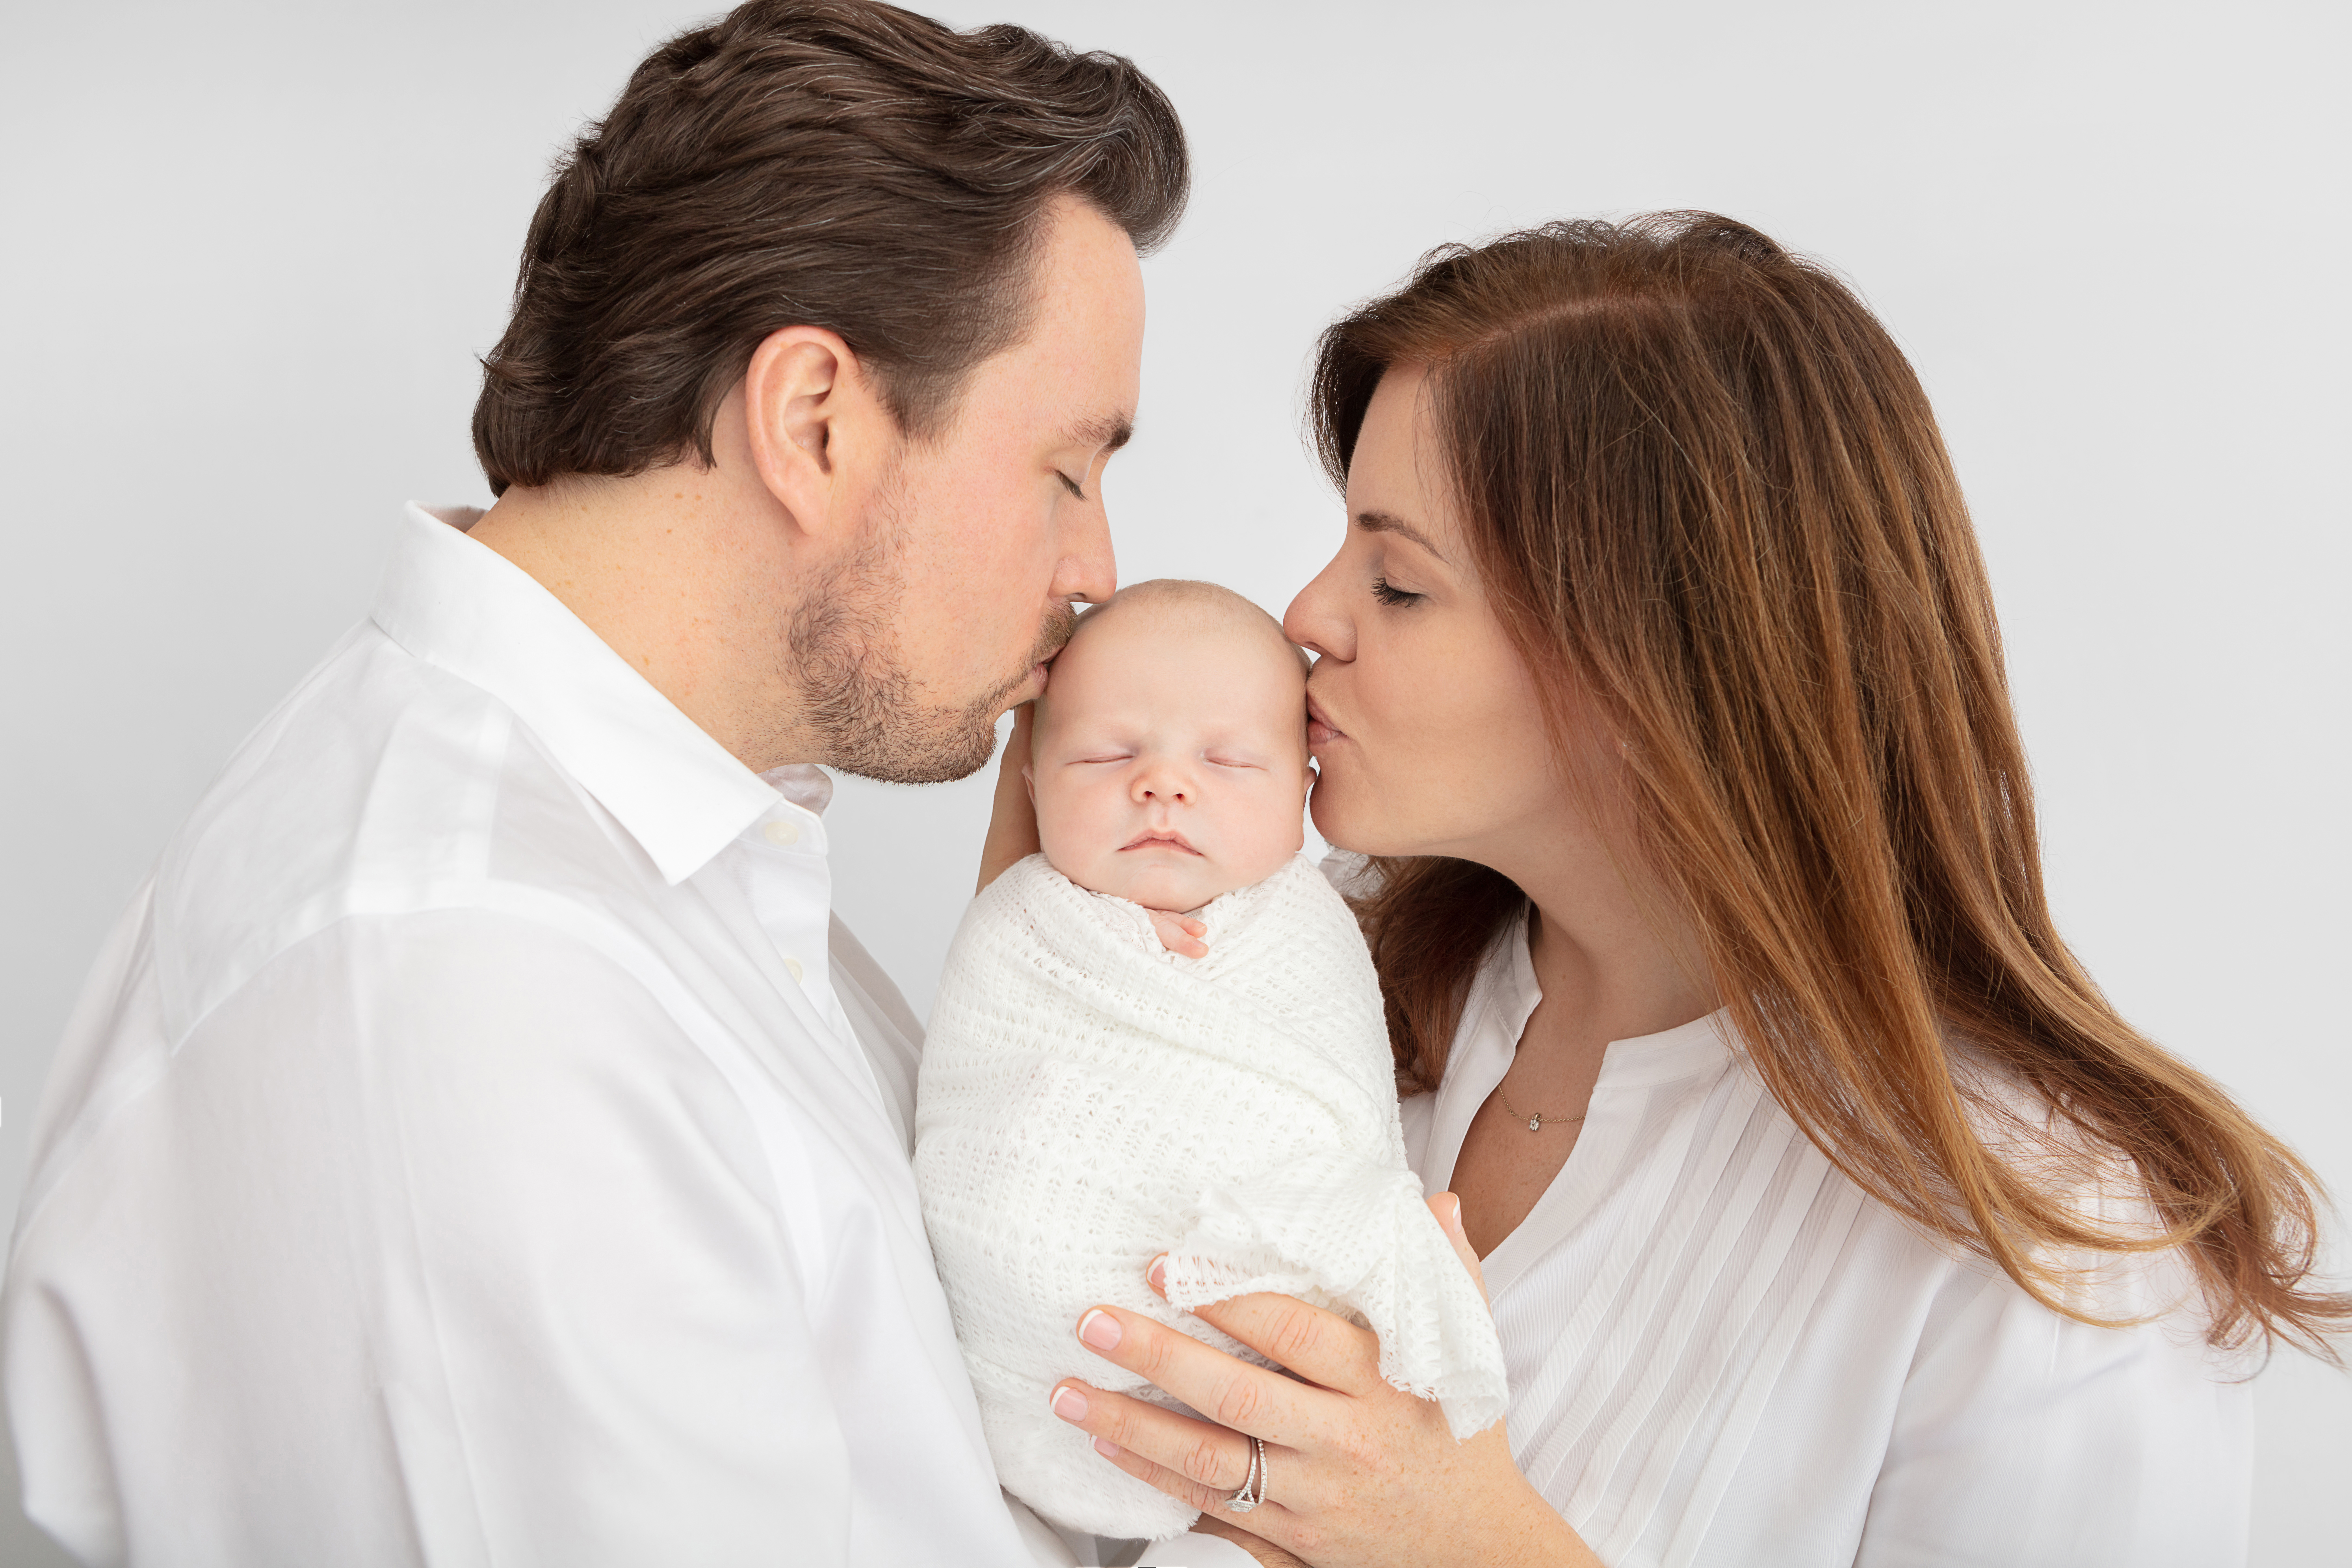 Studio posed newborn baby portrait session all in white, baby is cradled in-between mom and dad, kissing him on the cheeks